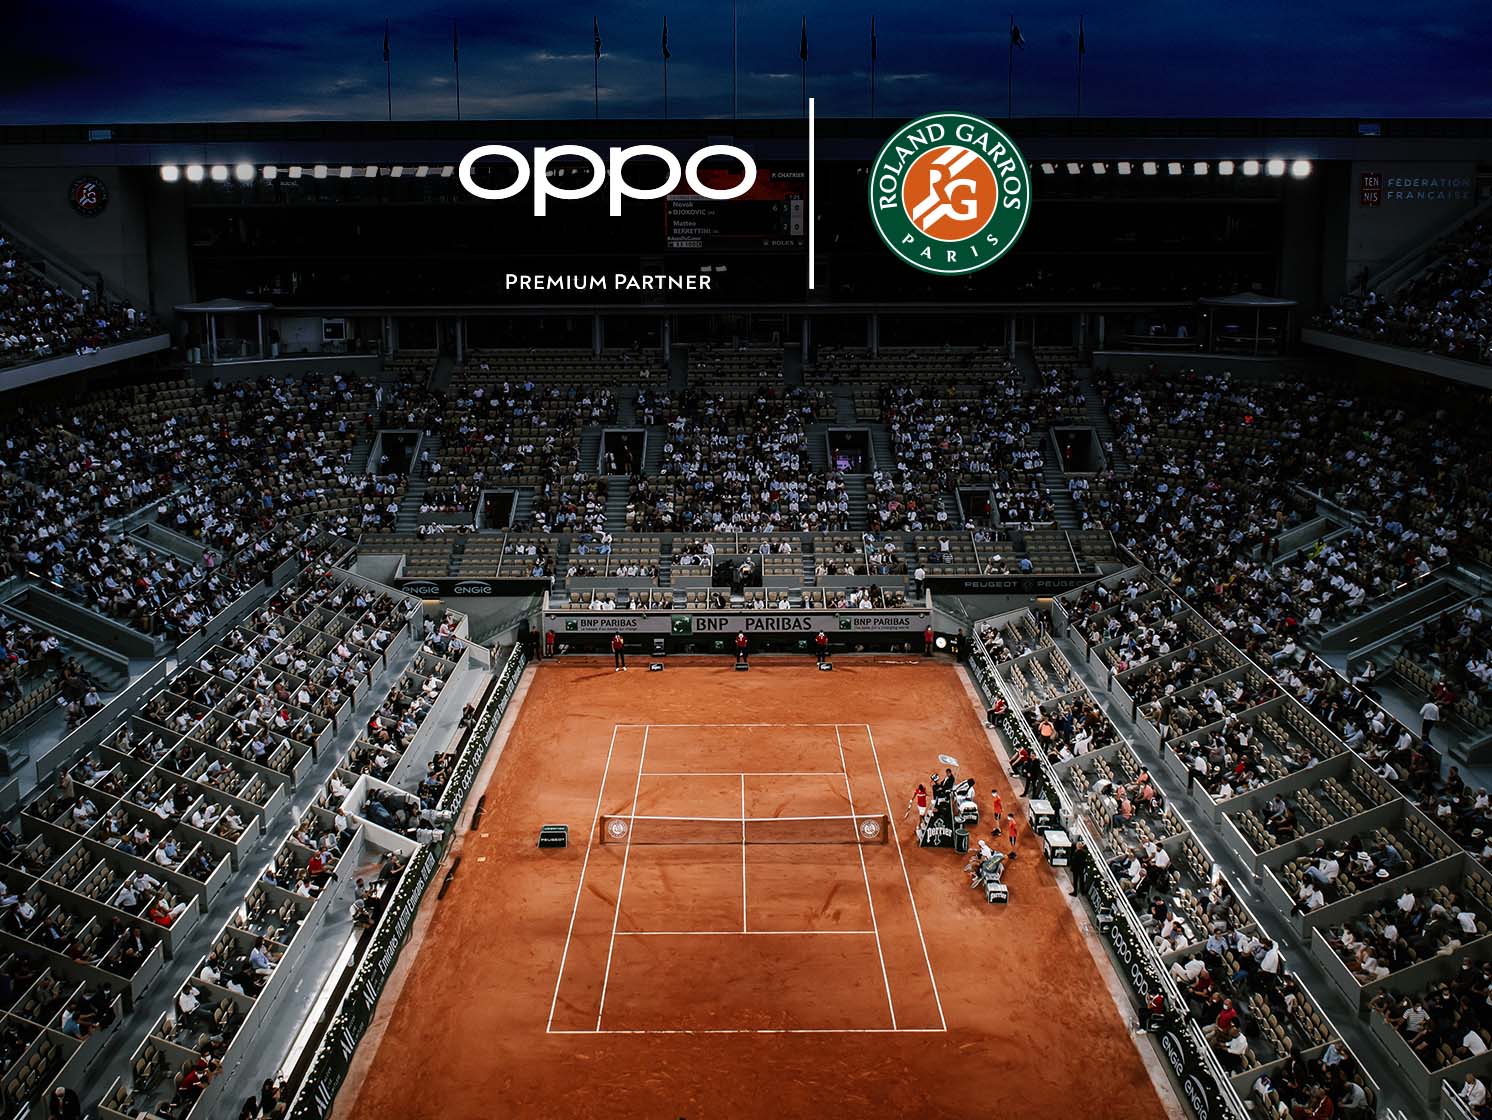 Roland-Garros and OPPO proudly announce extended premium partnership for 2022 and 2023 tournaments OPPO Global